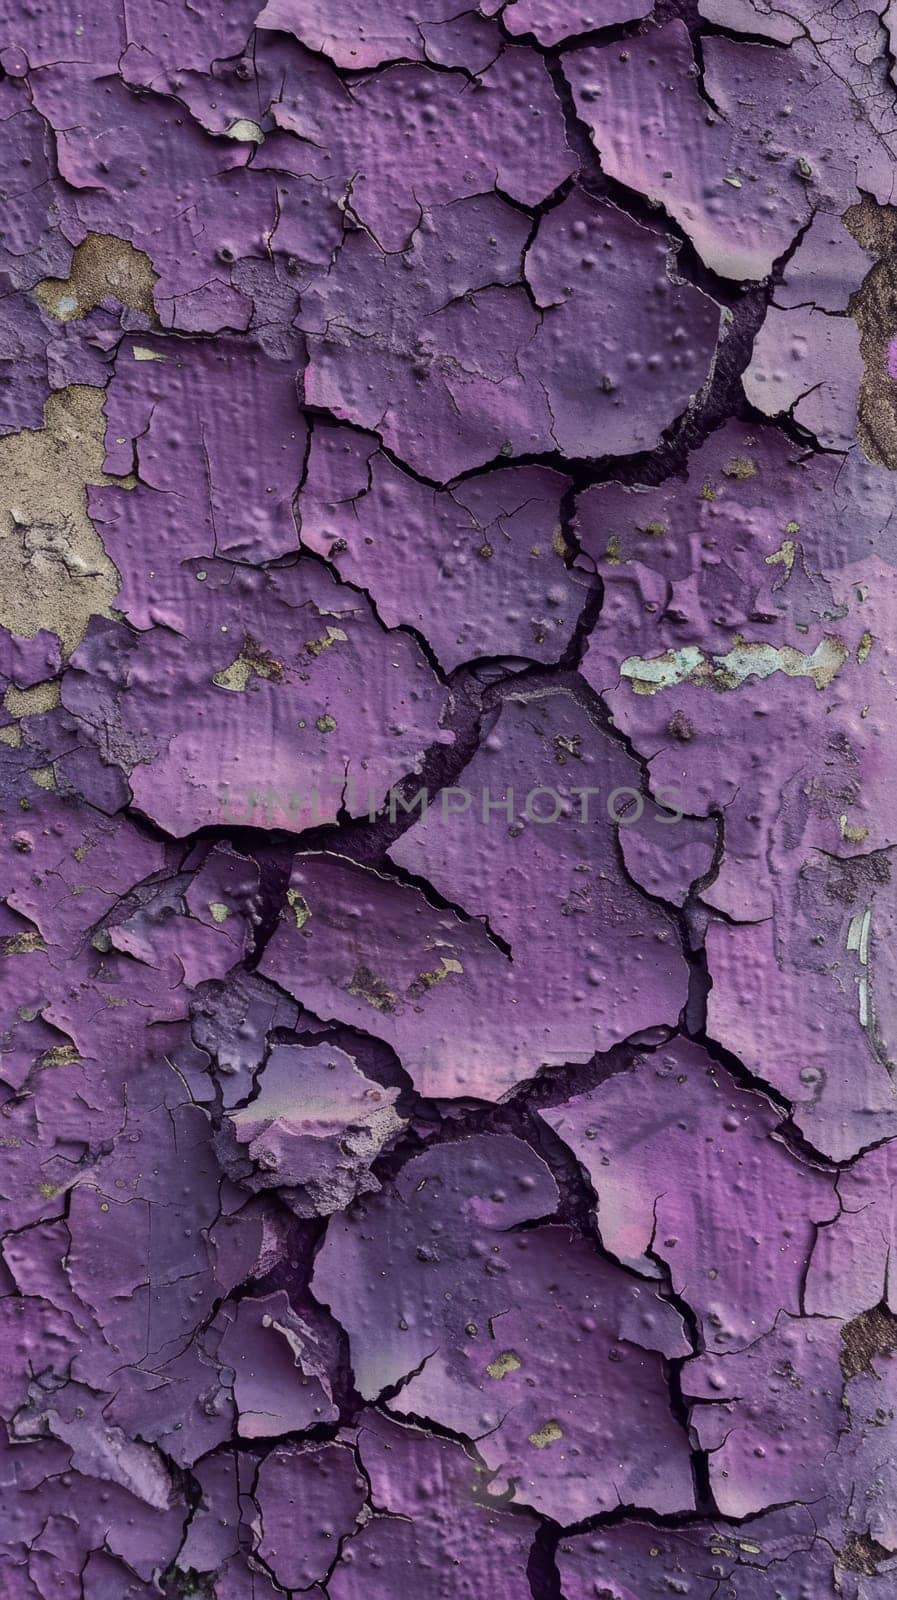 A vibrant purple surface shows a complex network of cracks and chips. The texture highlights the beauty of decay and the passage of time. by sfinks